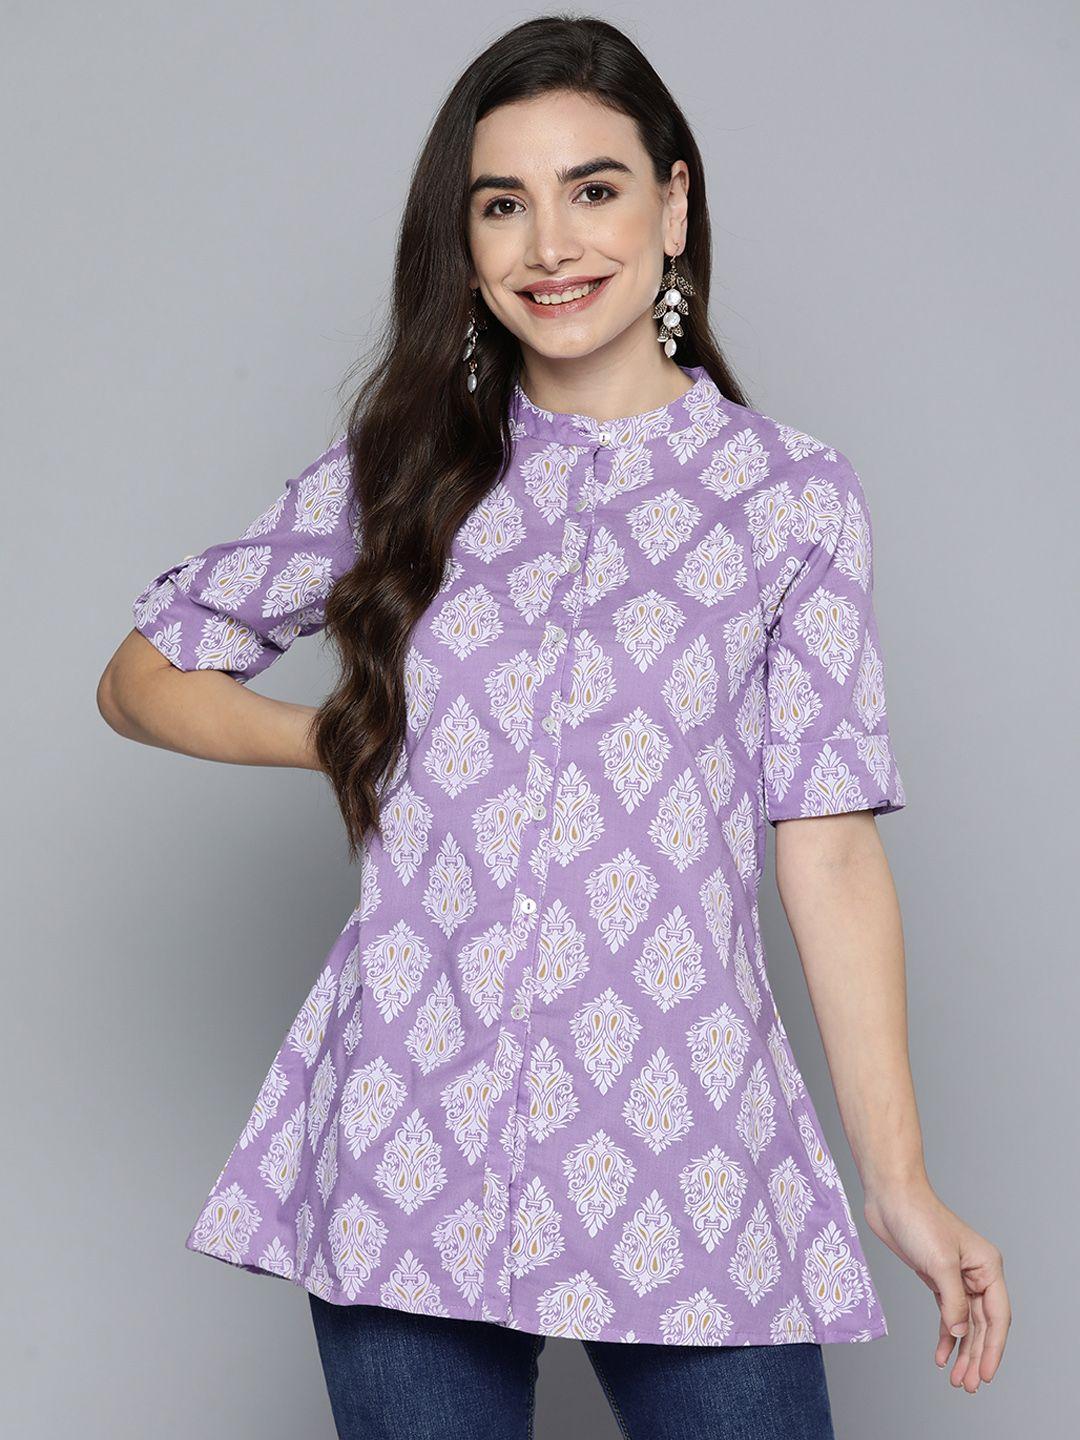 here&now-violet-&-white-ethnic-motifs-printed-pure-cotton-kurti